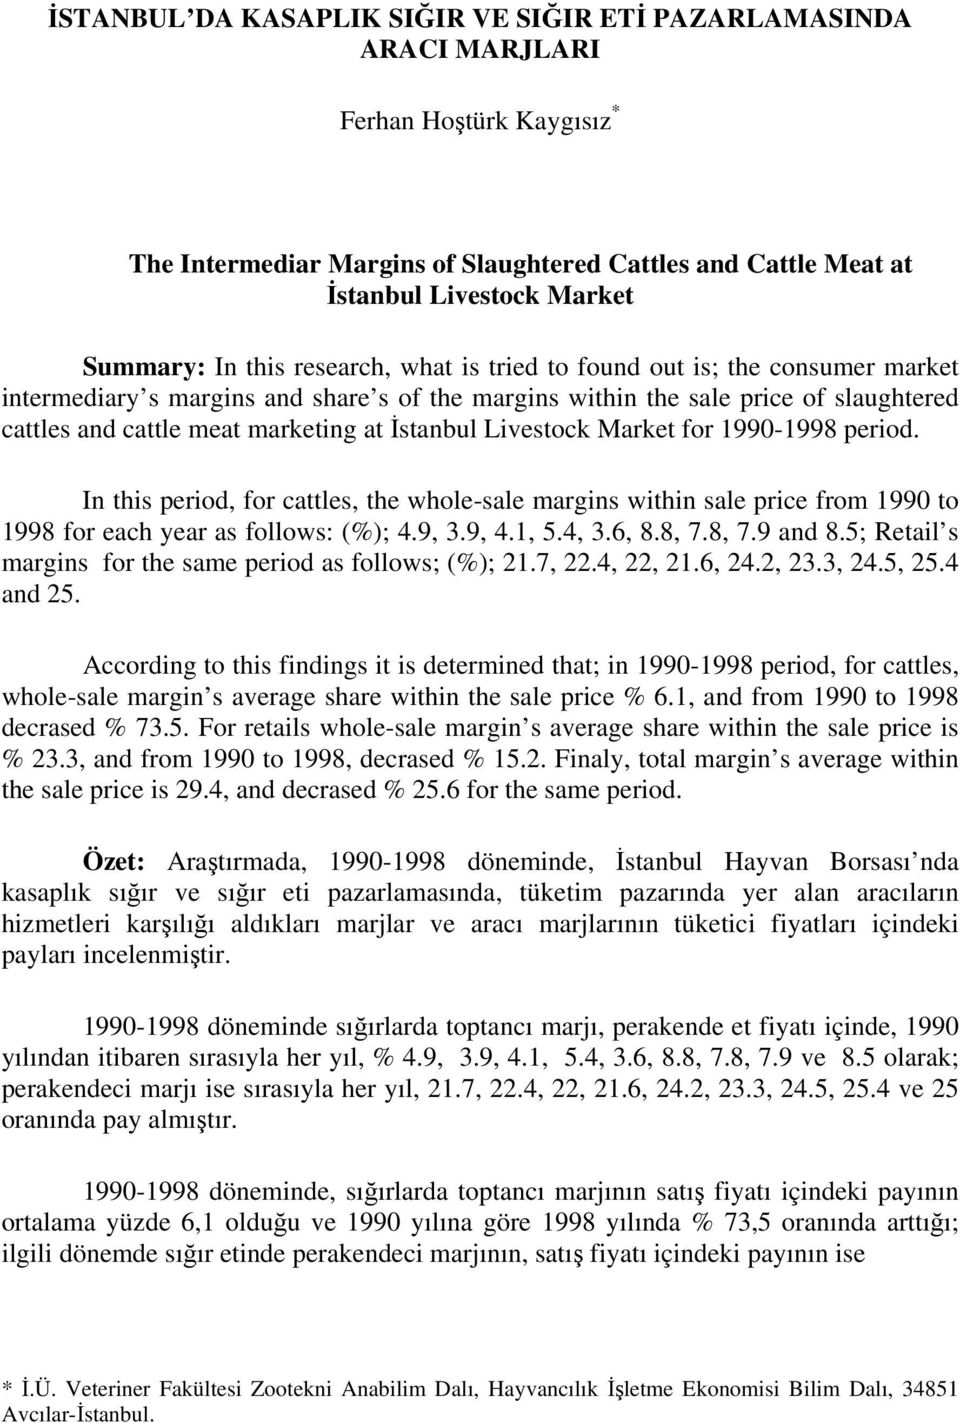 Livestock Market for 1990-1998 period. In this period, for cattles, the whole-sale margins within sale price from 1990 to 1998 for each year as follows: (%); 4.9, 3.9, 4.1, 5.4, 3.6, 8.8, 7.8, 7.9 and 8.